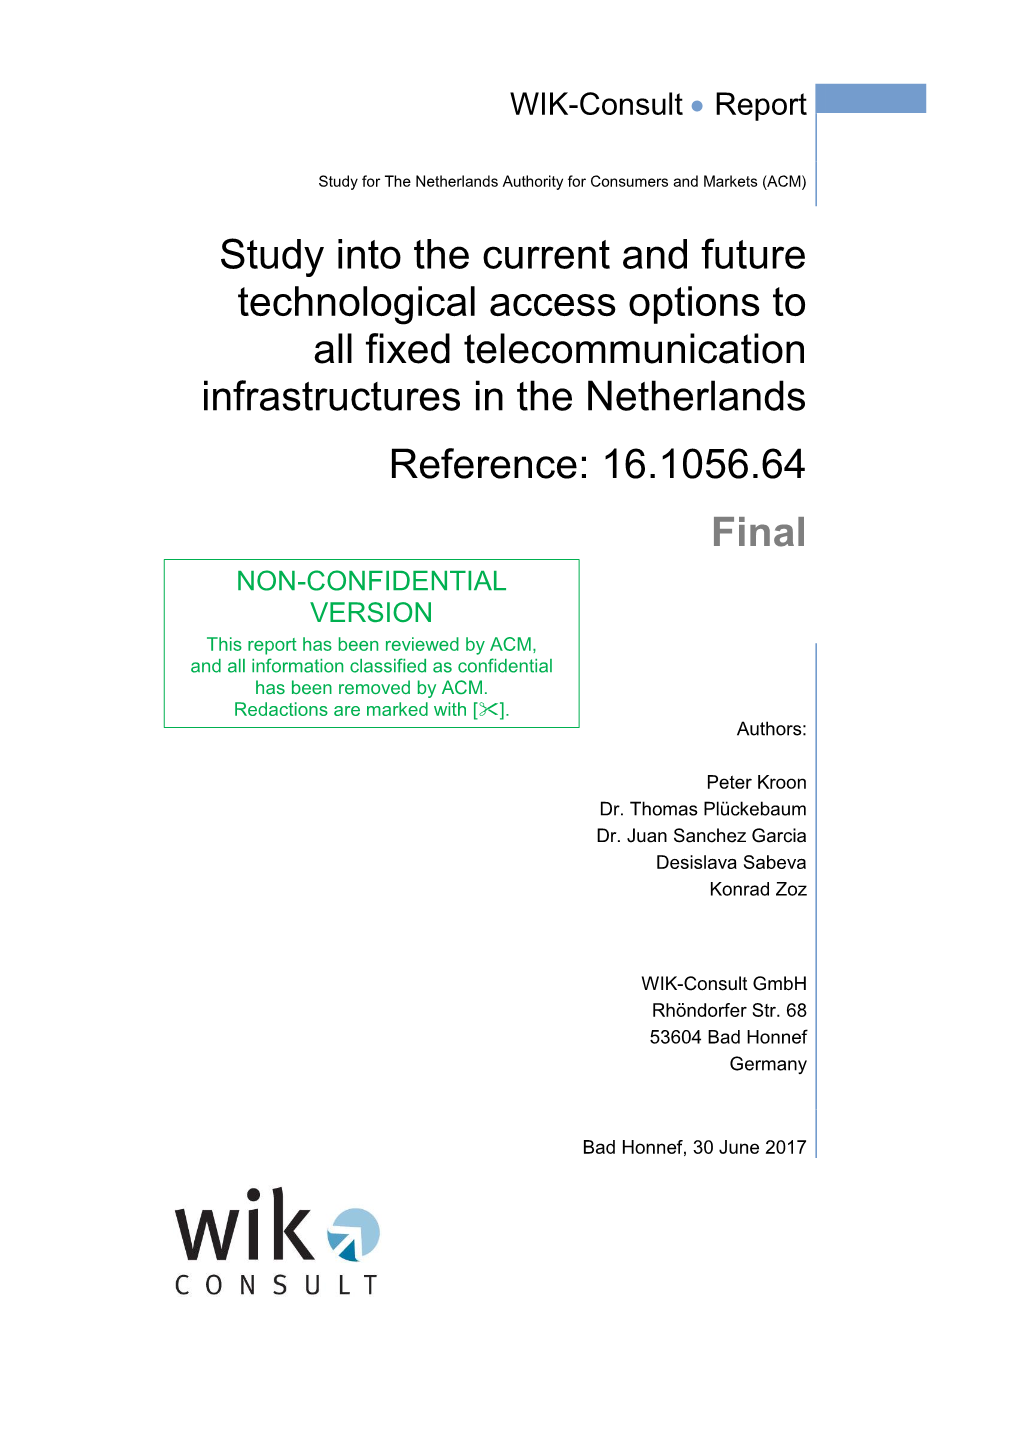 Study Into the Current and Future Technological Access Options to All Fixed Telecommunication Infrastructures in the Netherlands Reference: 16.1056.64